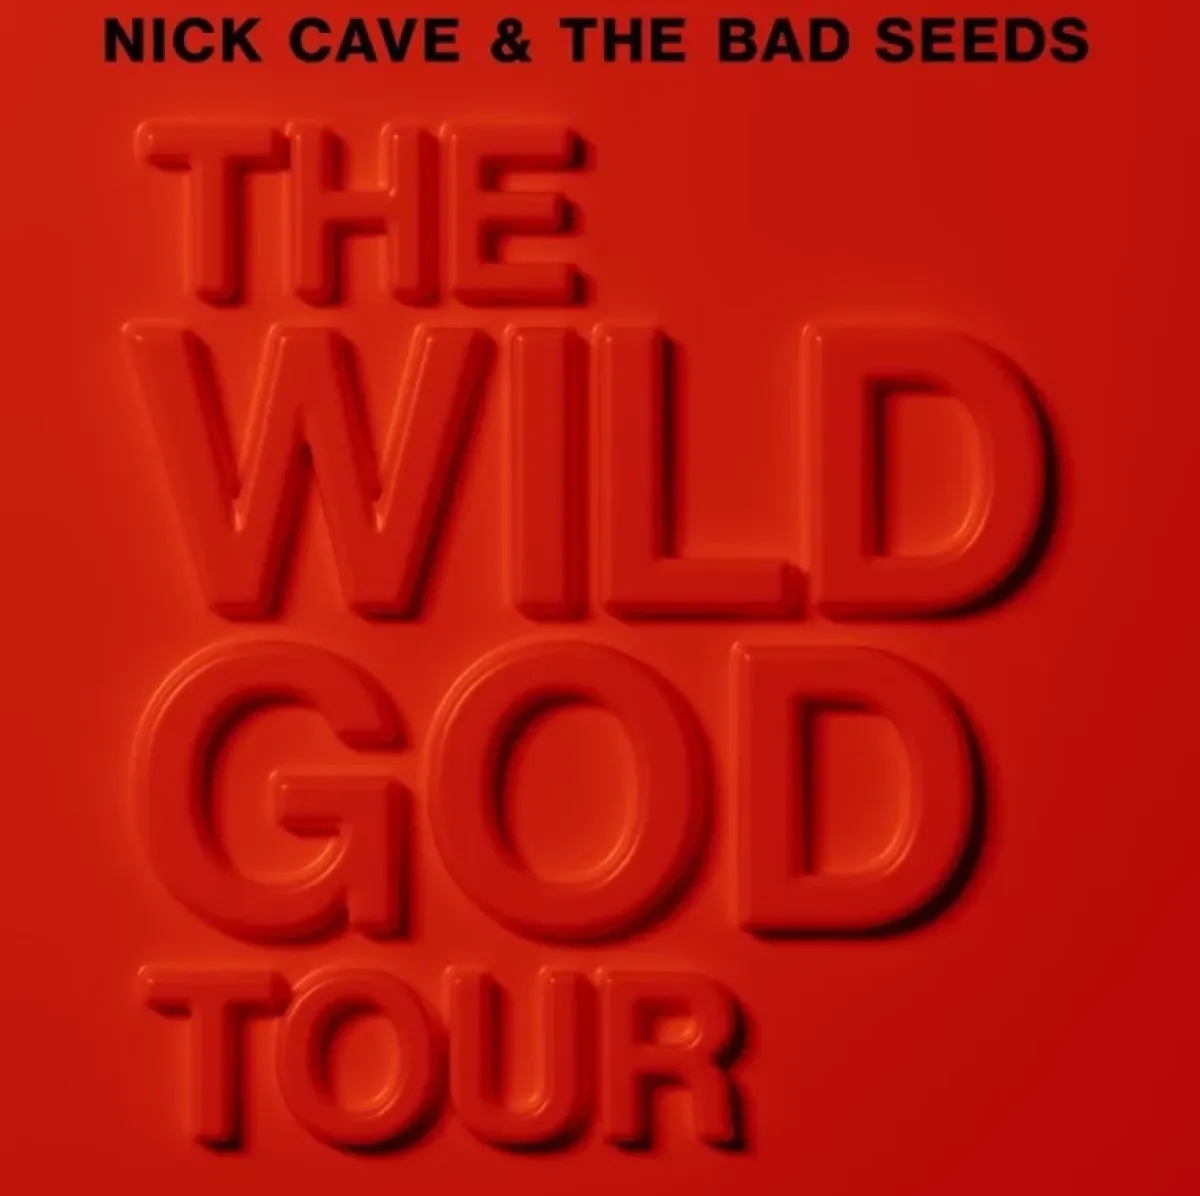 Nick Cave And The Bad Seeds at O2 Arena Prague Tickets